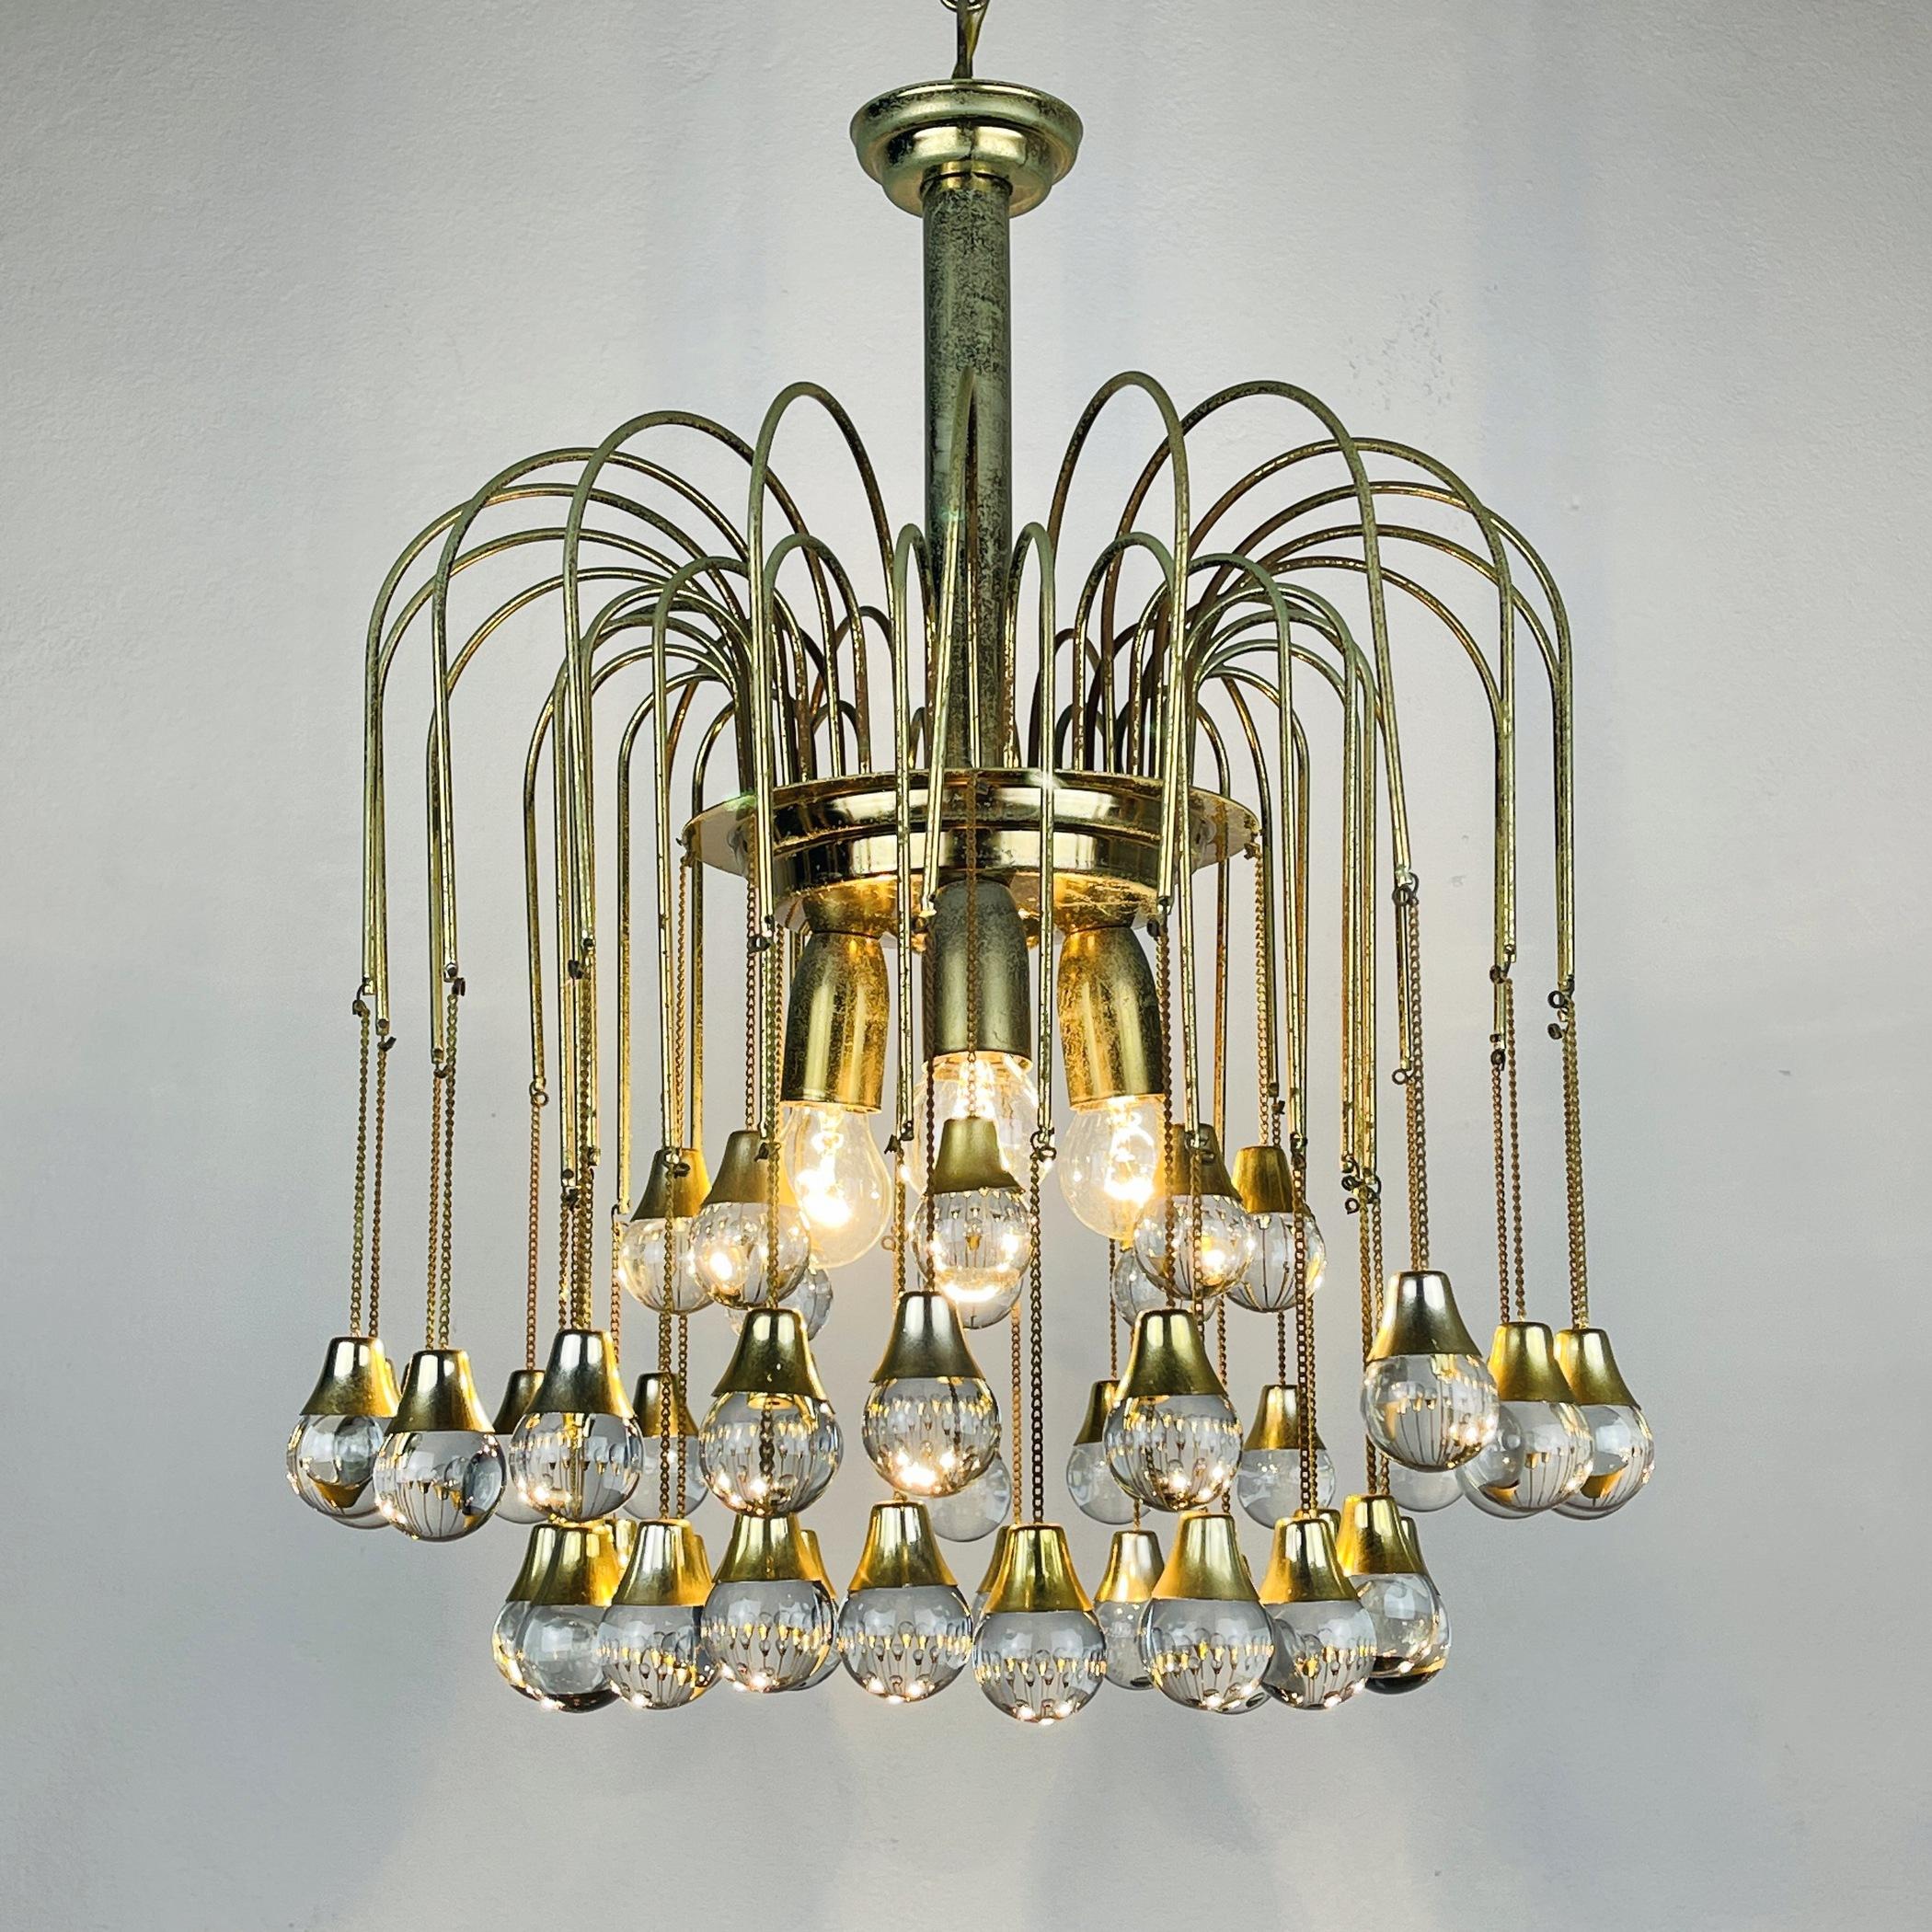 Vintage Cascade Glass Chandelier Italy 1960s Brass and 48 Glass Balls 9